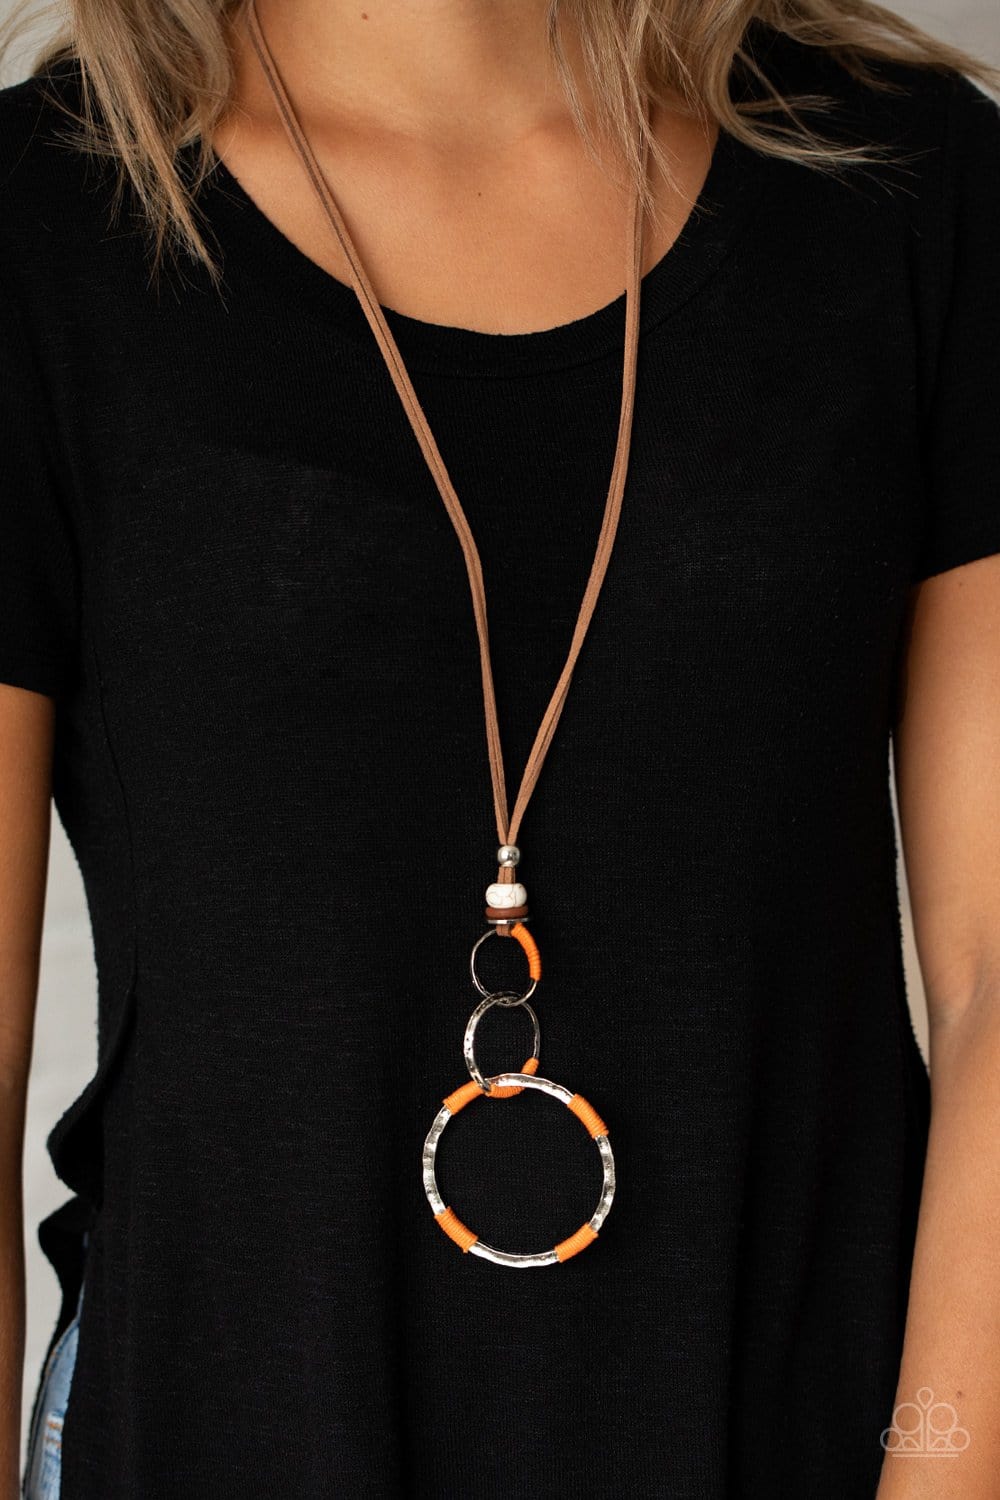 Paparazzi Accessories: Rural Renovation - Orange/Brown Suede Necklace - Jewels N Thingz Boutique